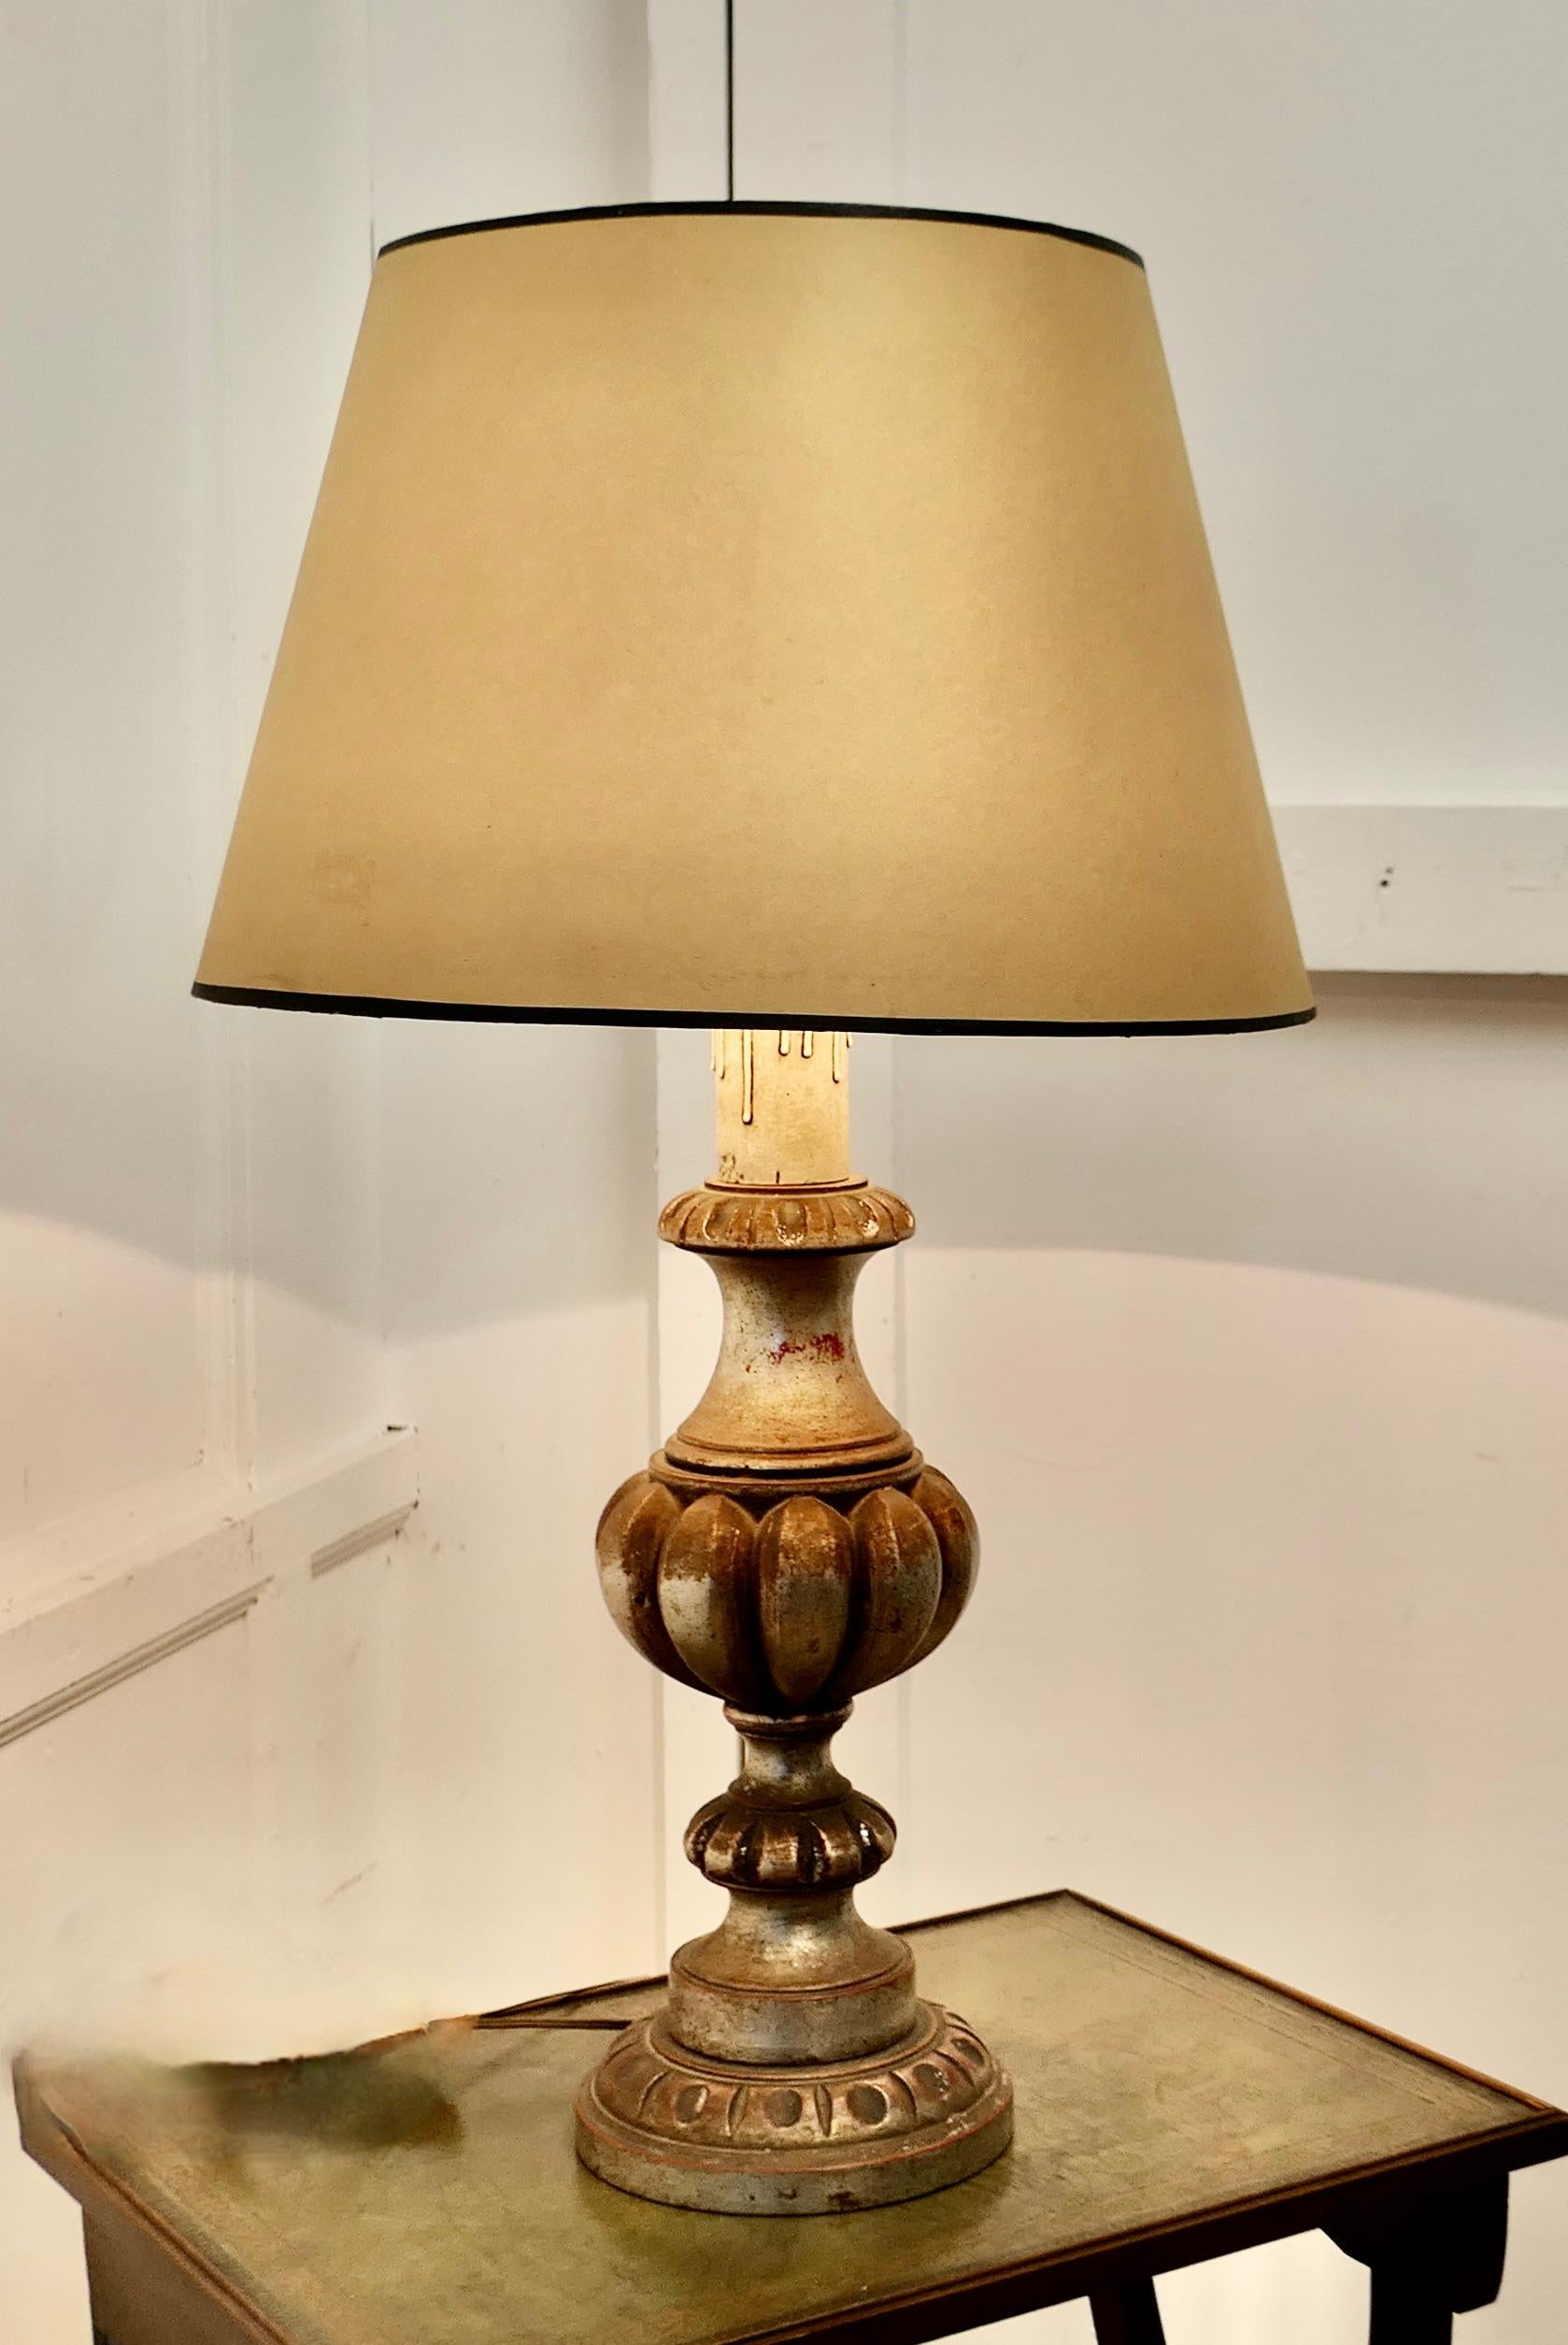 Large Carved Wooden Table Lamp  This is a great statement piece, it has a large  In Good Condition For Sale In Chillerton, Isle of Wight